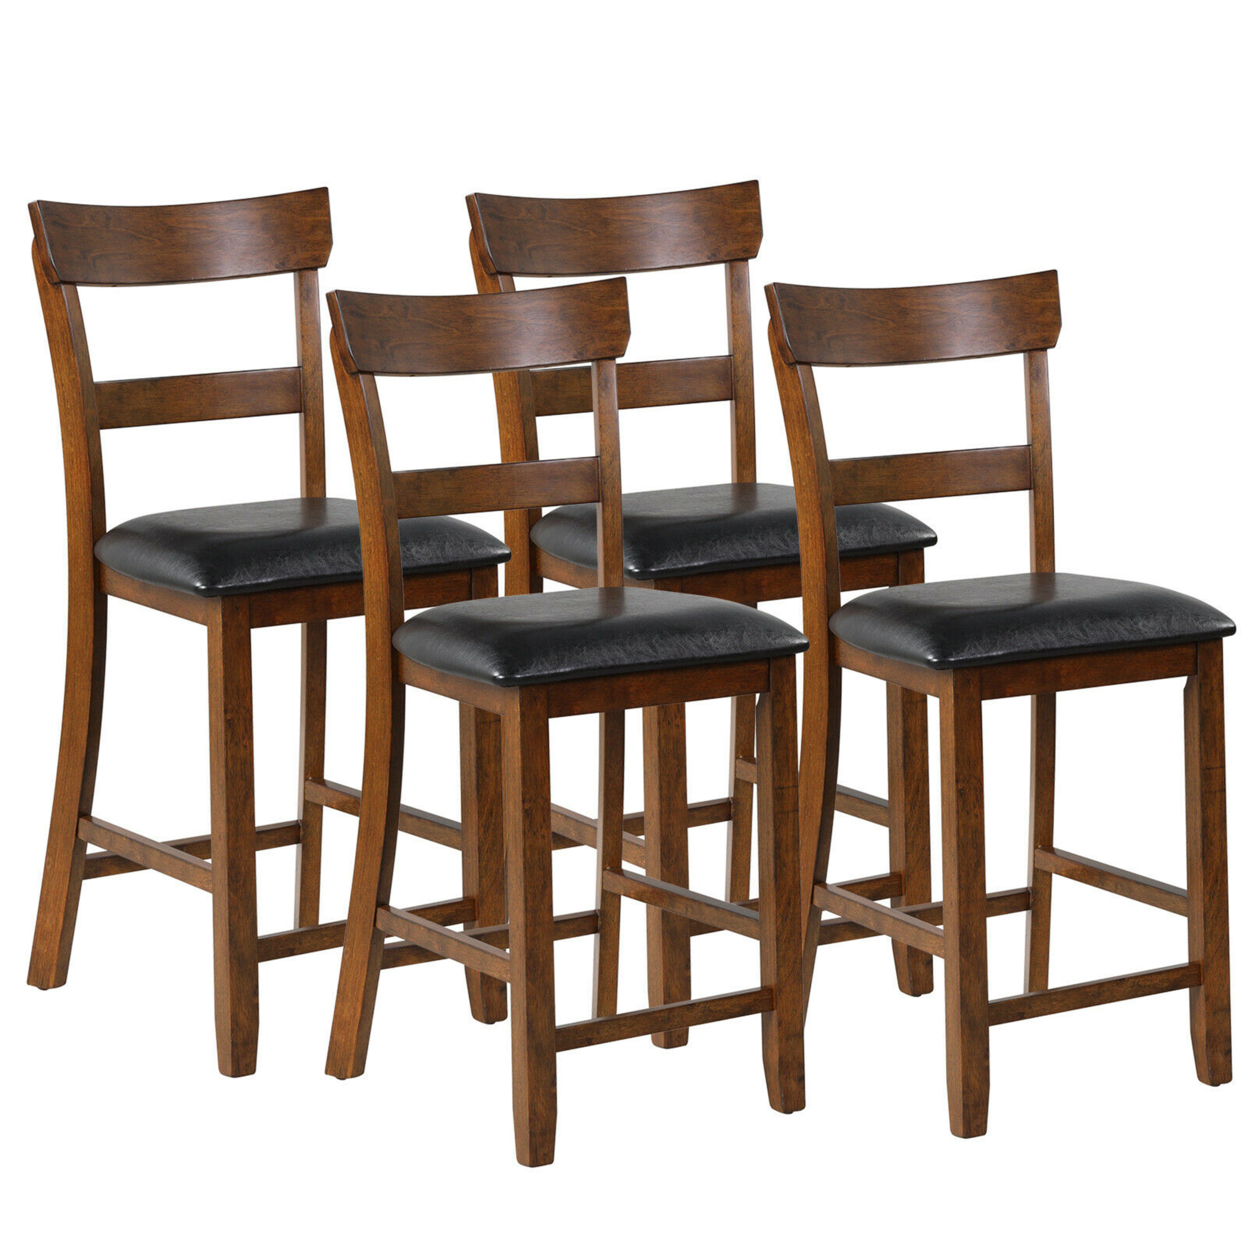 Set Of 4 Barstools Counter Height Chairs W/Leather Seat & Rubber Wood Legs